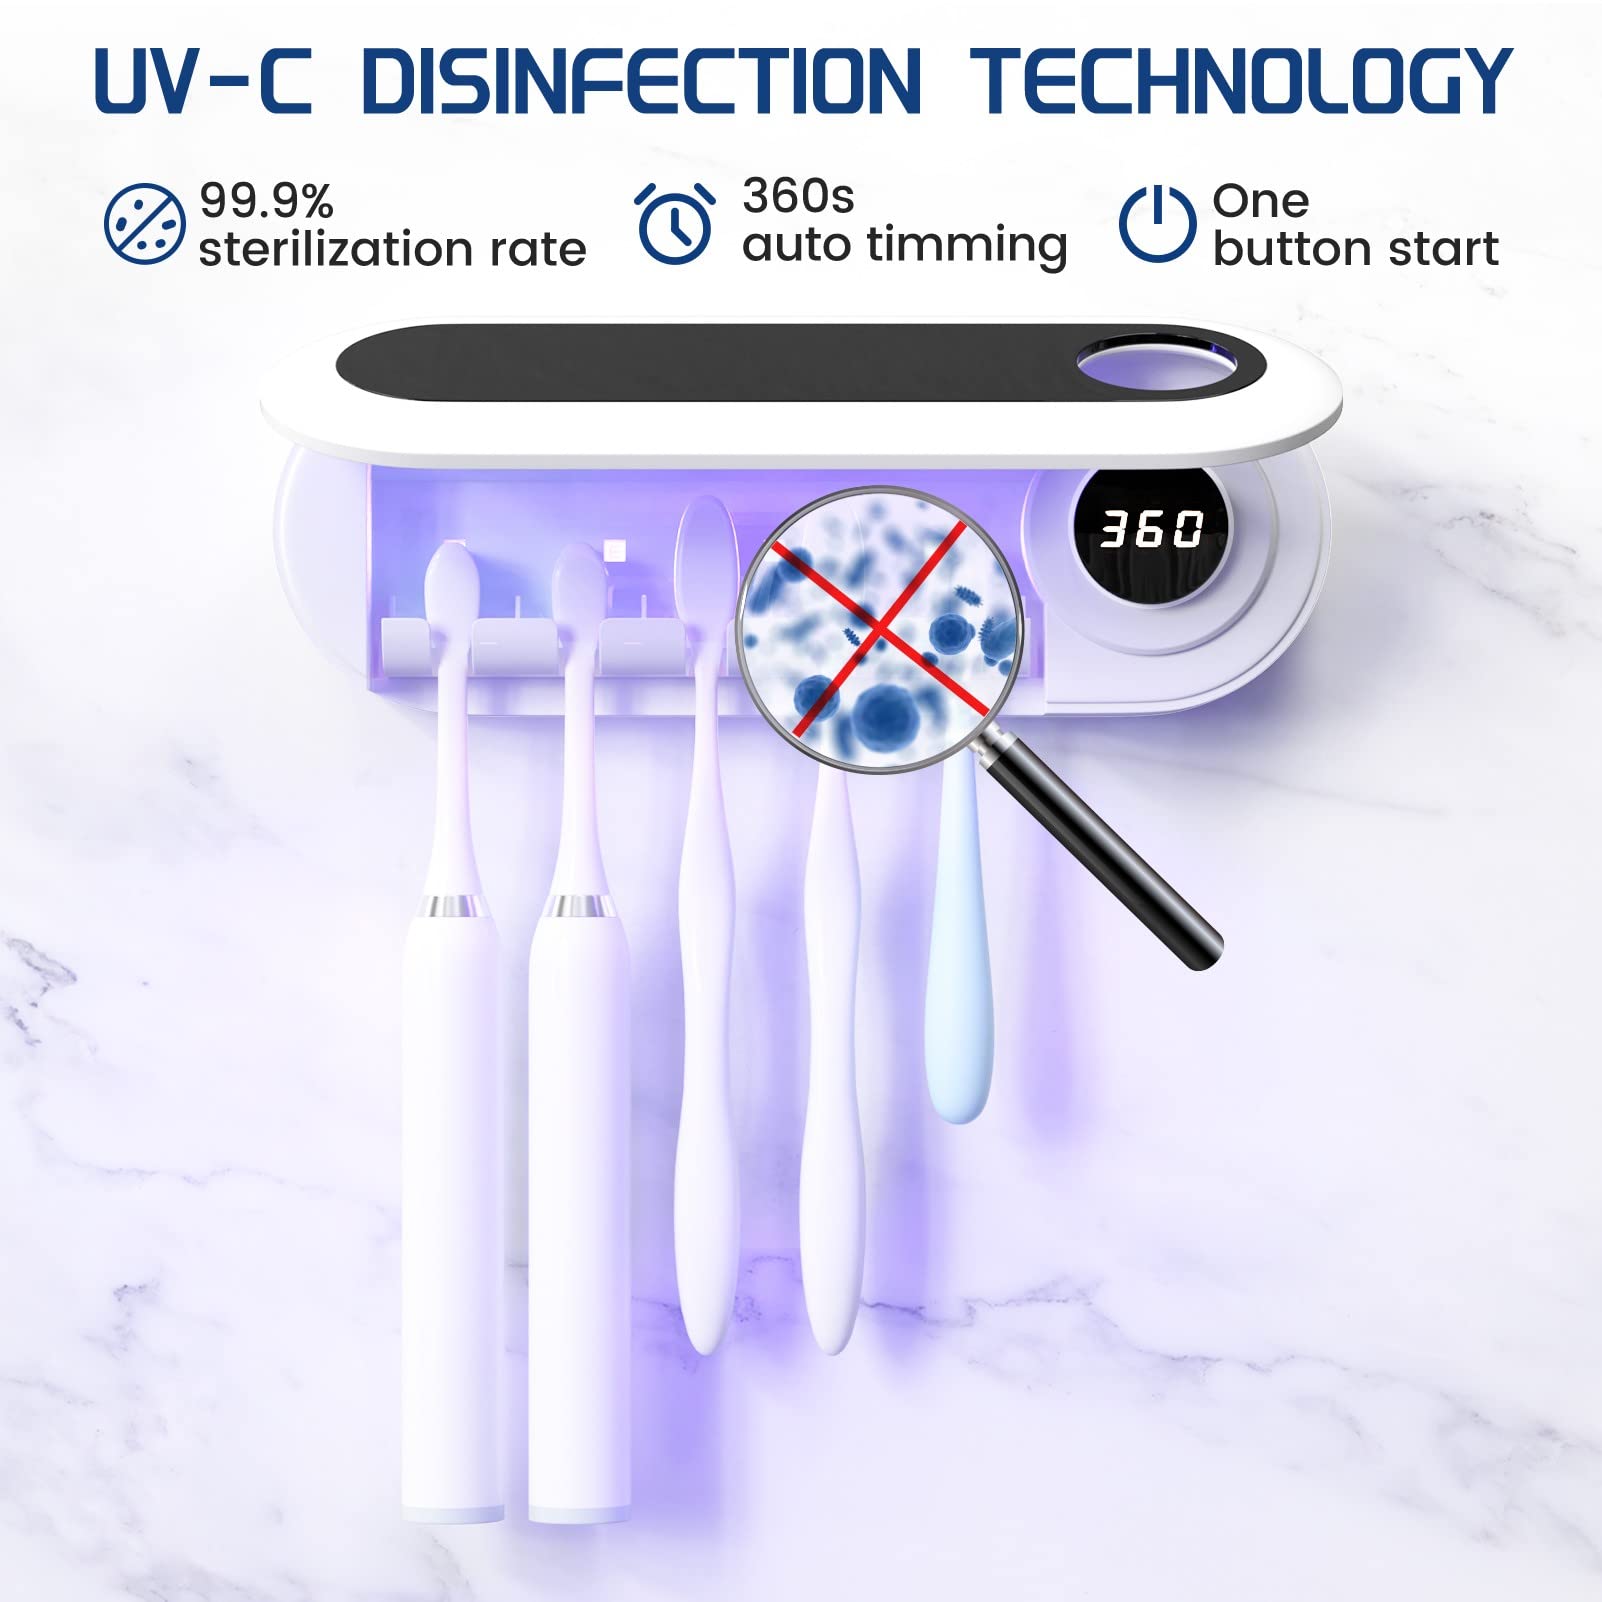 Toothbrush sterilizer wall-mounted